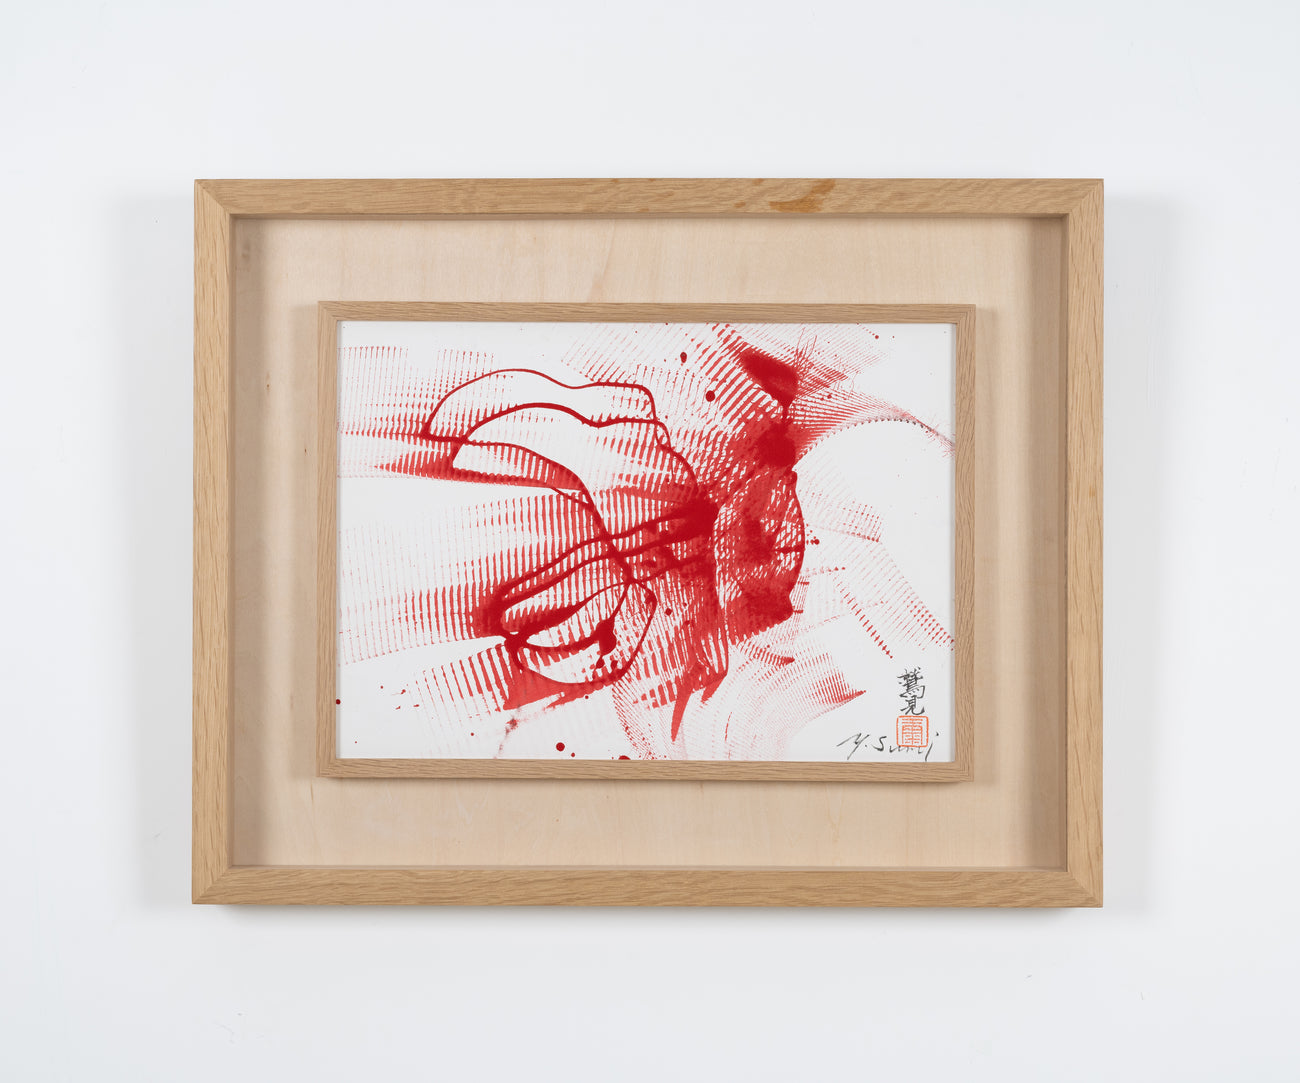 Composition SY-P-13, YASUO SUMI, 1970Frame, Paper, Ink25.6cm × 36.1cm